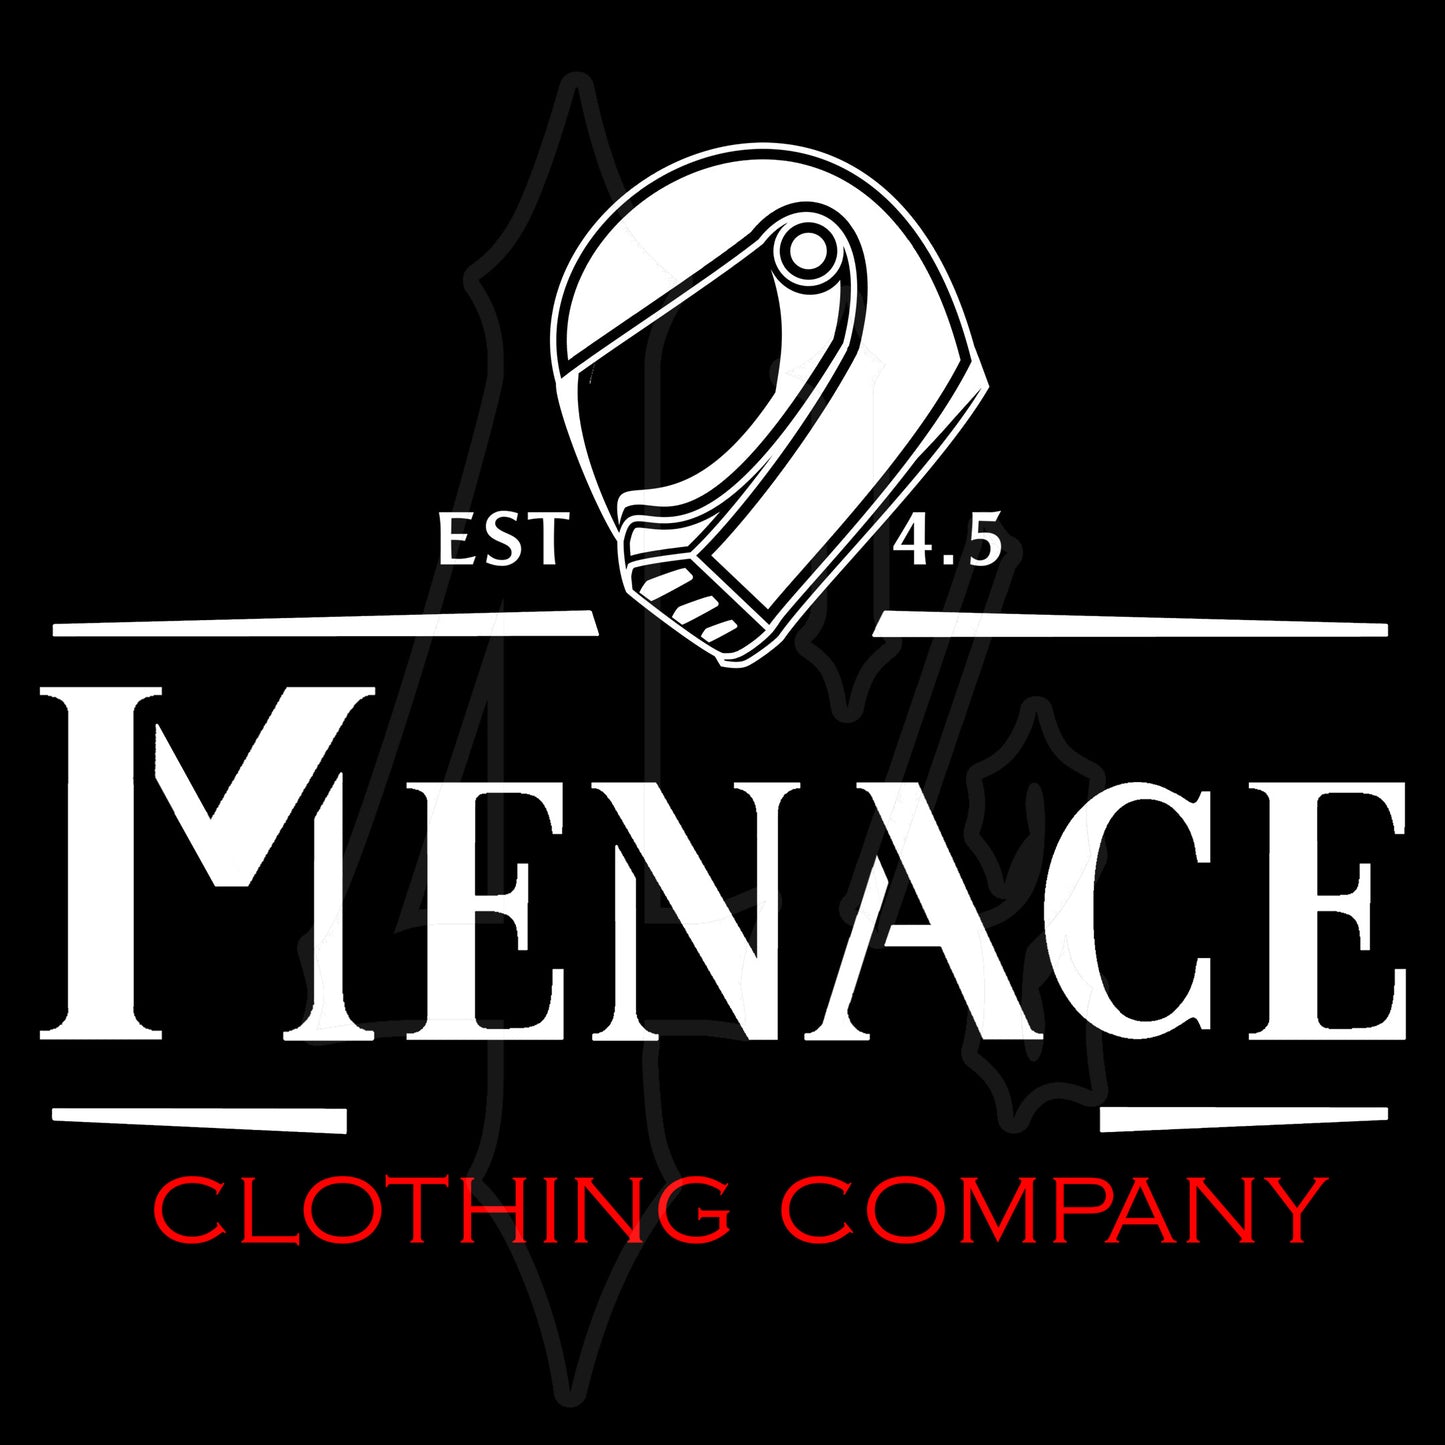 Menace Clothing Menness graphic. Motorcycle helmet with Menace written in white and clothing company in red.